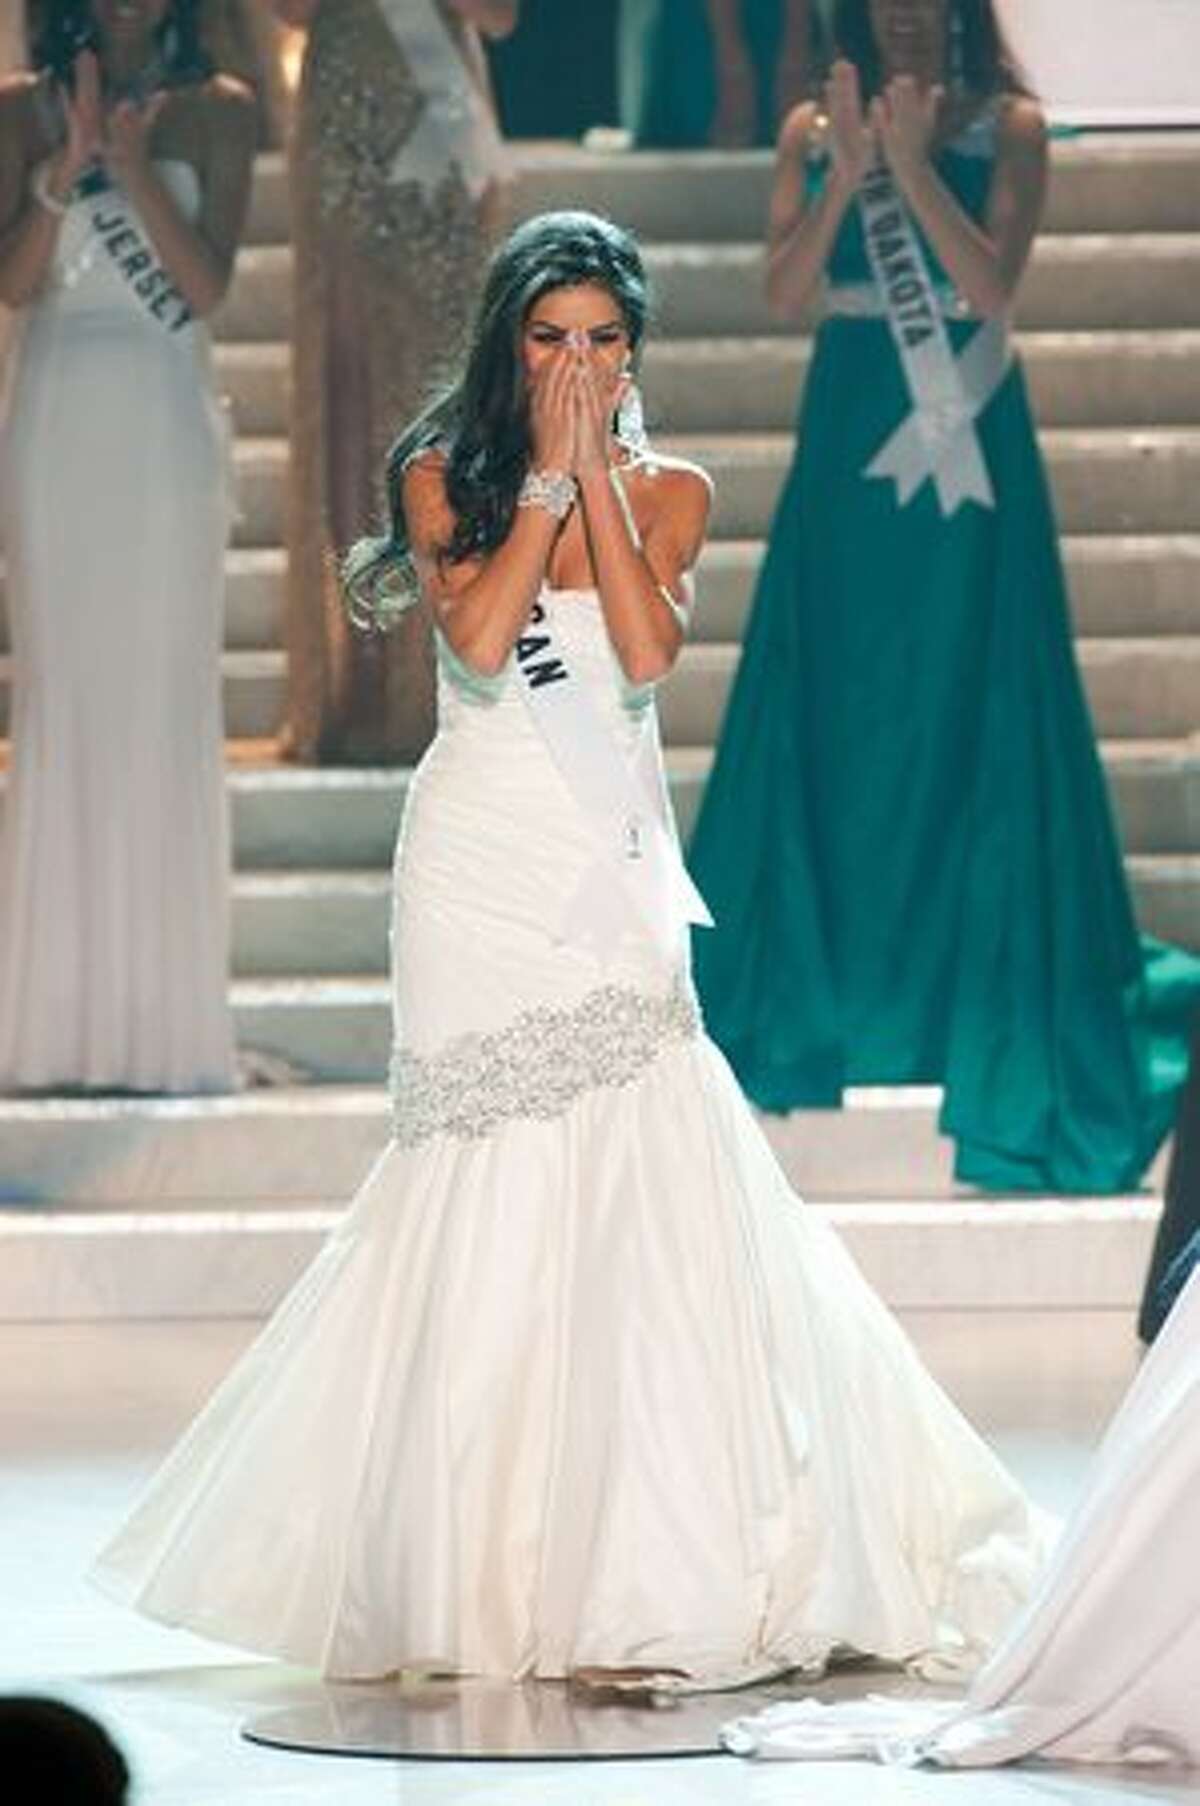 Rima Fakih, 24, of Dearborn, Mich., reacts after being named Miss USA 2010.